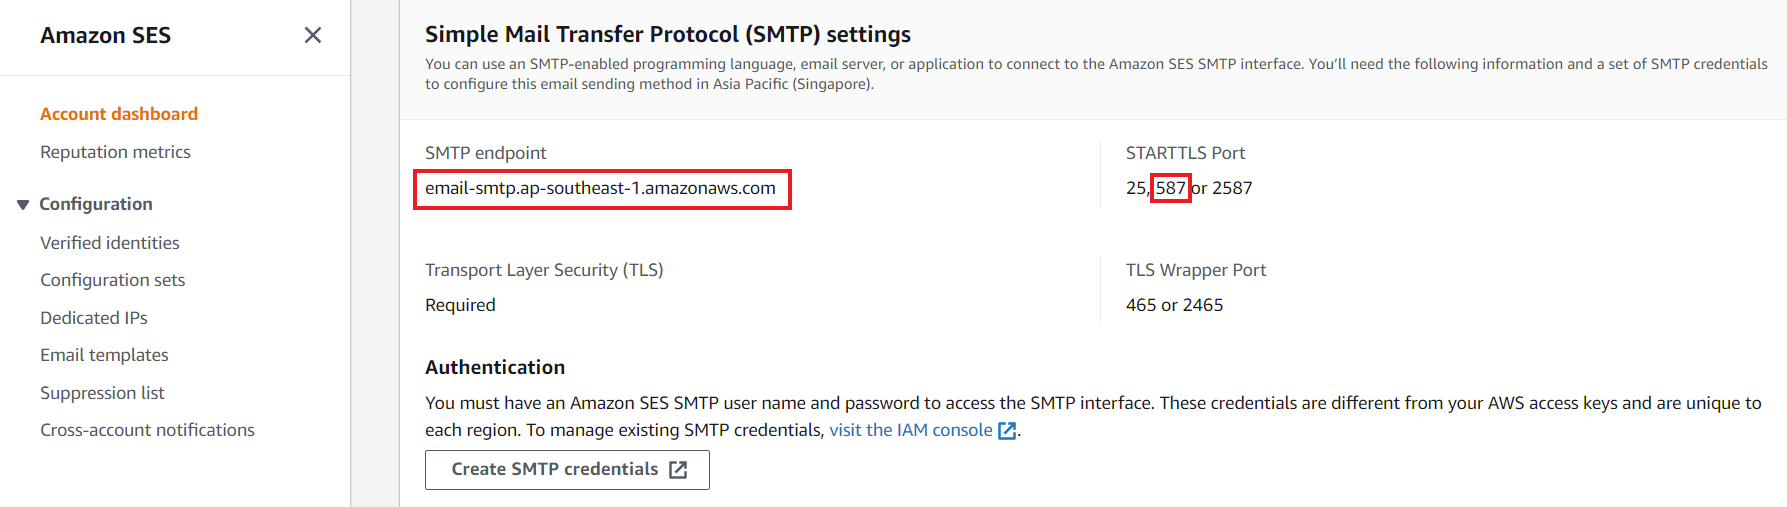 smtp_endpoint